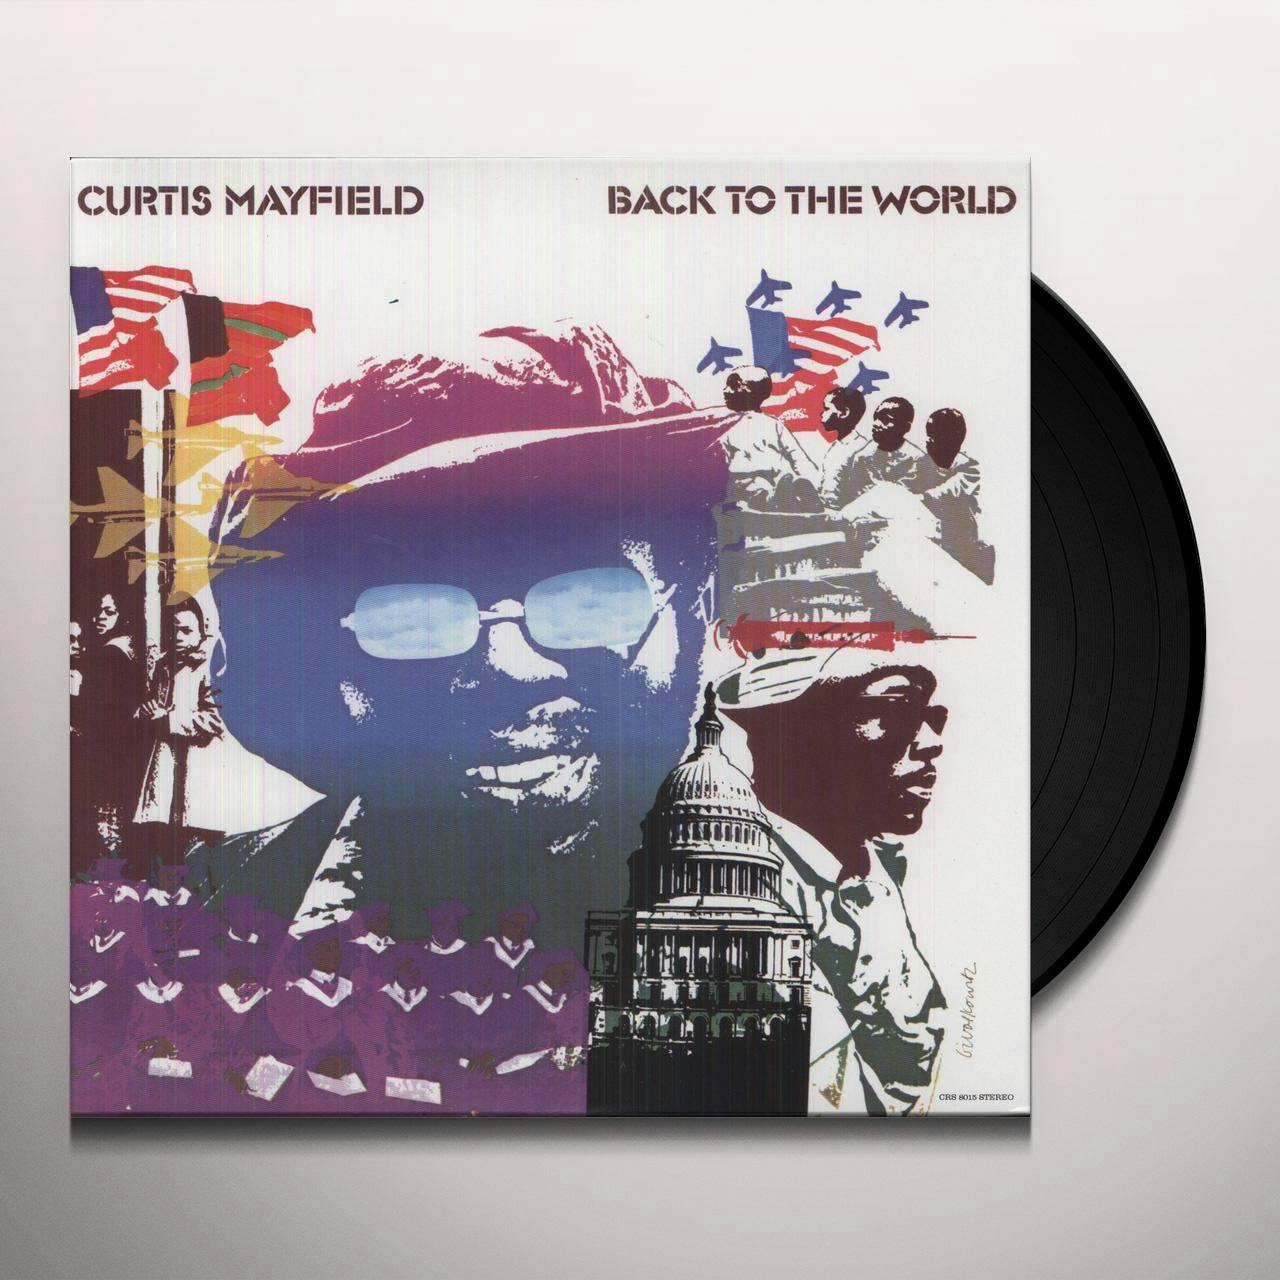 CURTIS MAYFIELD BACK TO THE WORLD